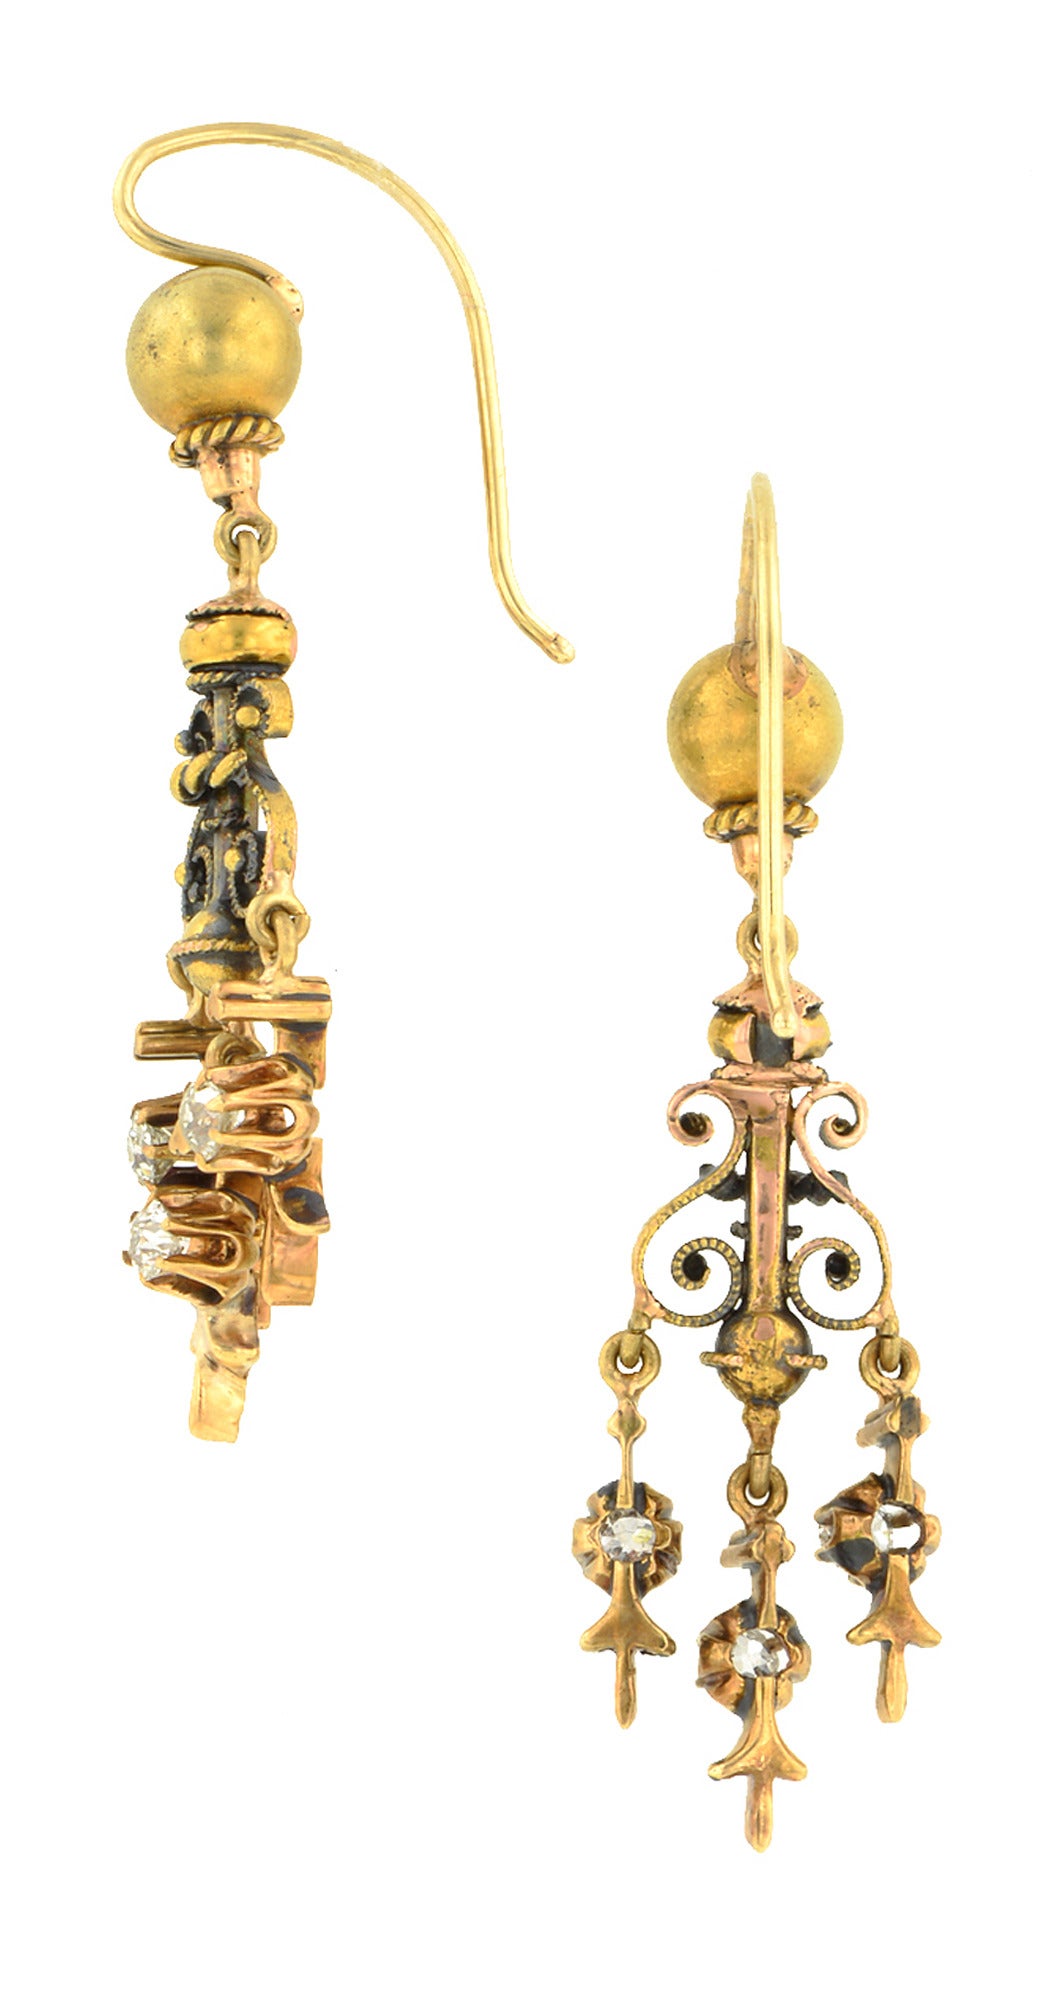 Victorian diamond drop earrings scroll wire work pendants with featuring a three diamond drop design, set with Old European cut diamonds weighing app. 0.42ctw., suspended from ball tops, fashioned in 14k. Circa 1880. Length 1 3/4 inches.